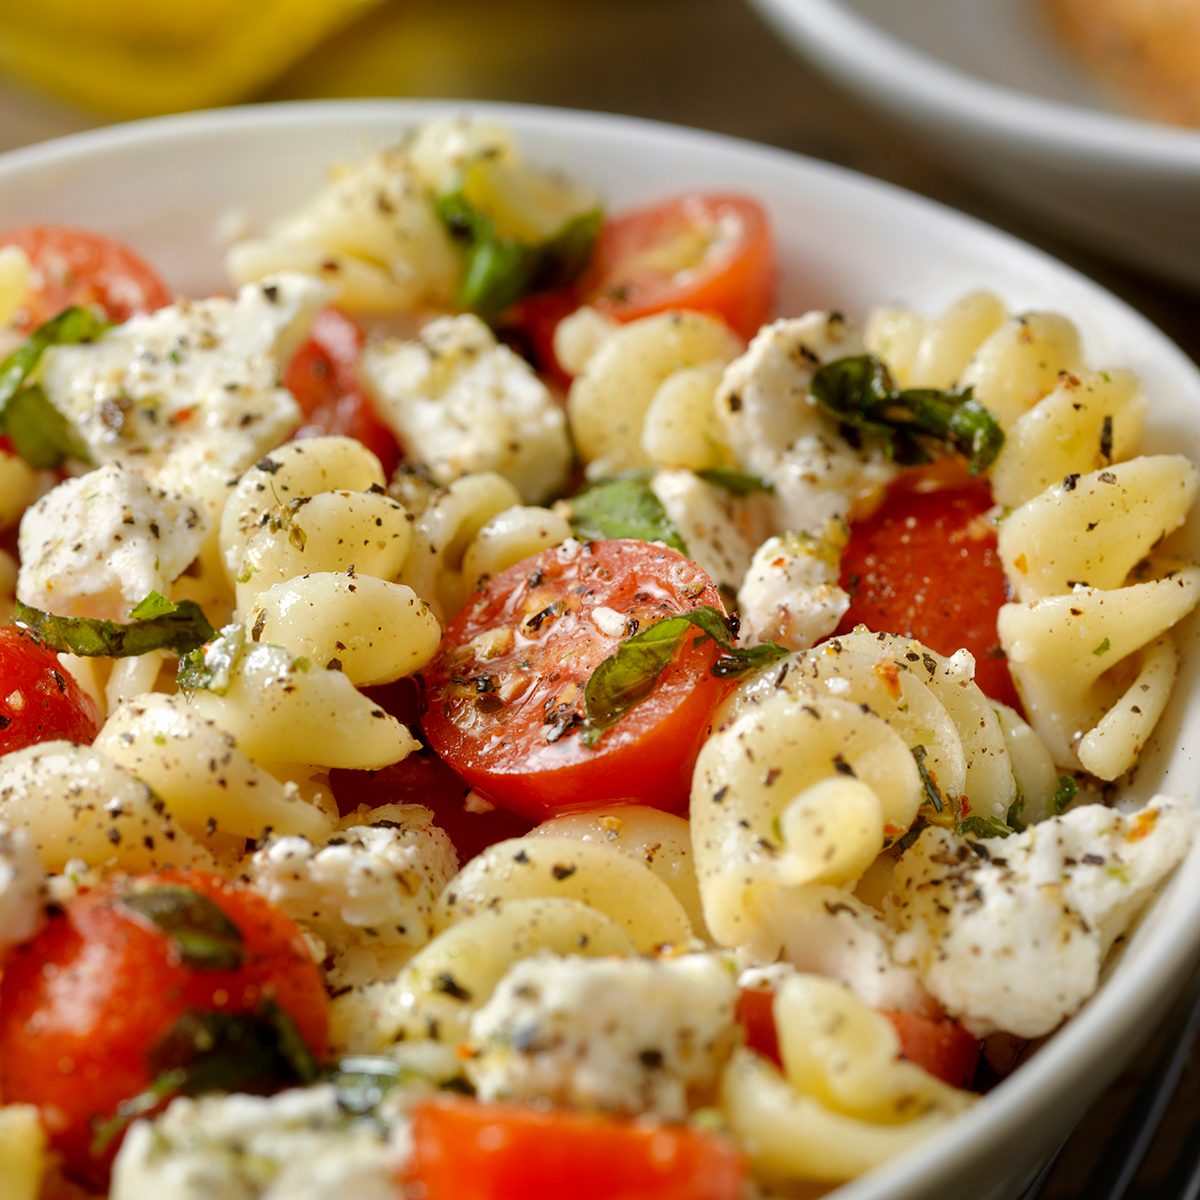 12 Easy Pasta Salad Ideas You Should Try Tonight | Taste of Home